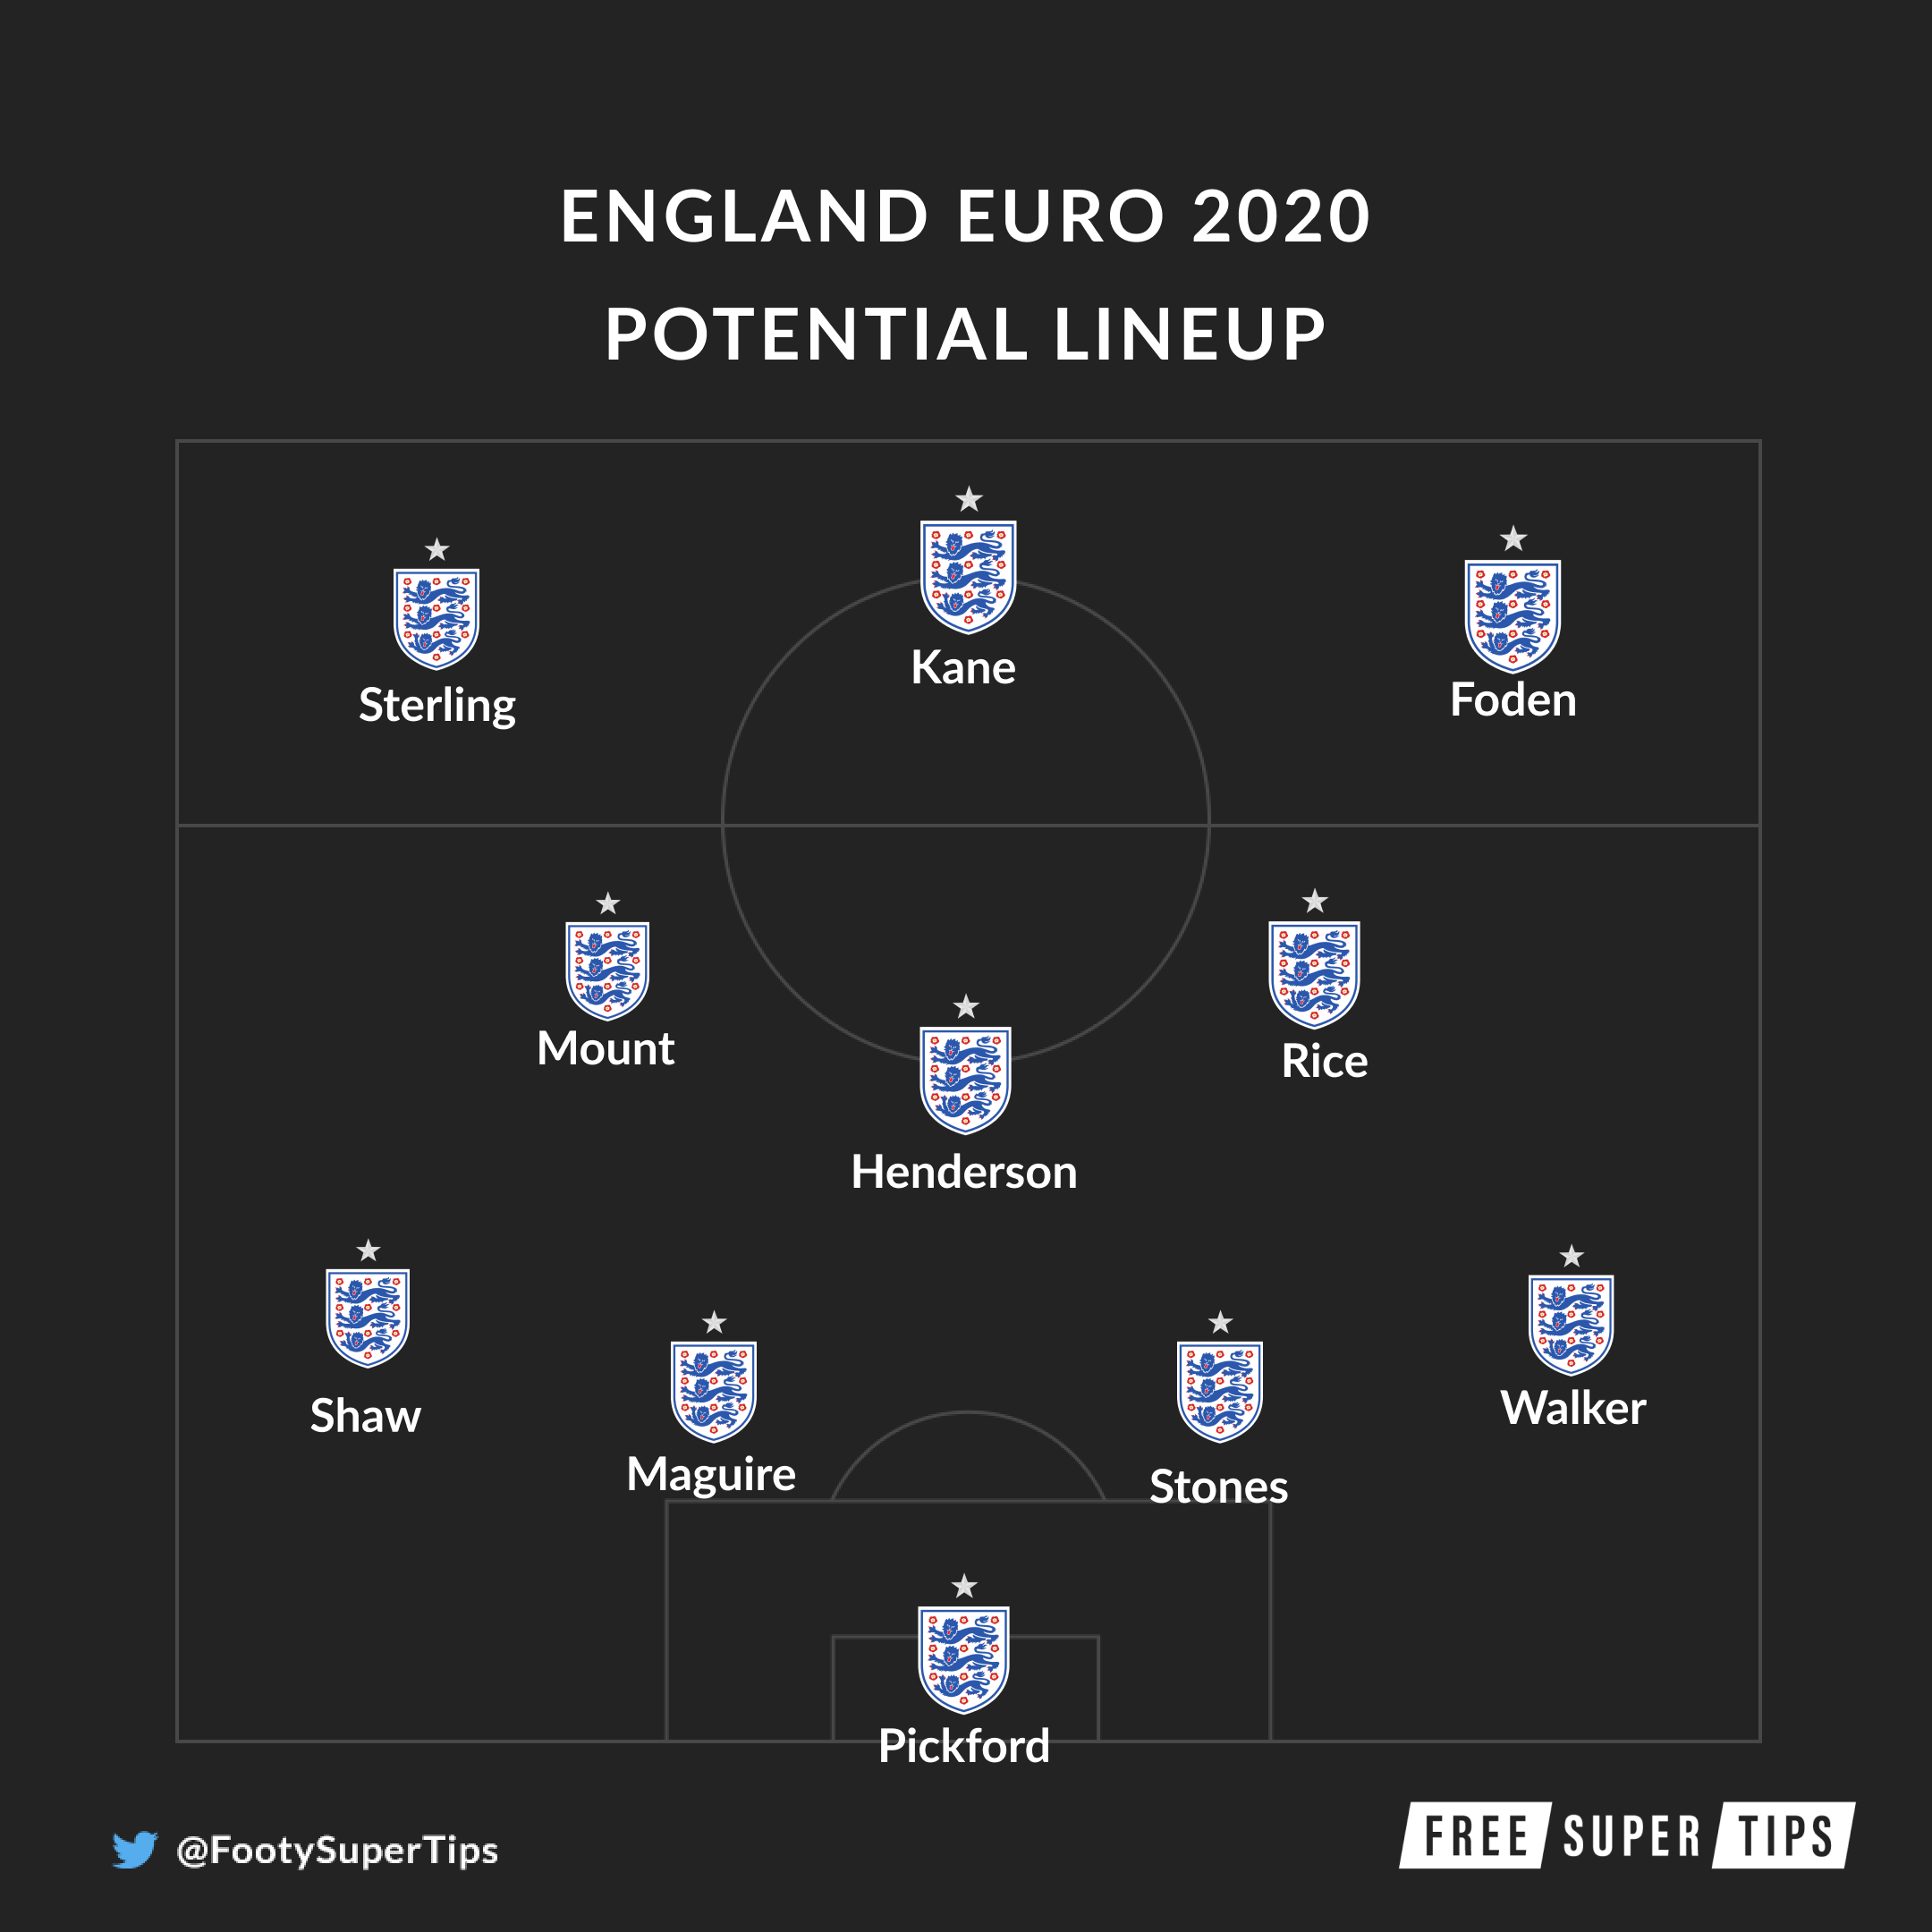 England's Possible Euro 2020 side